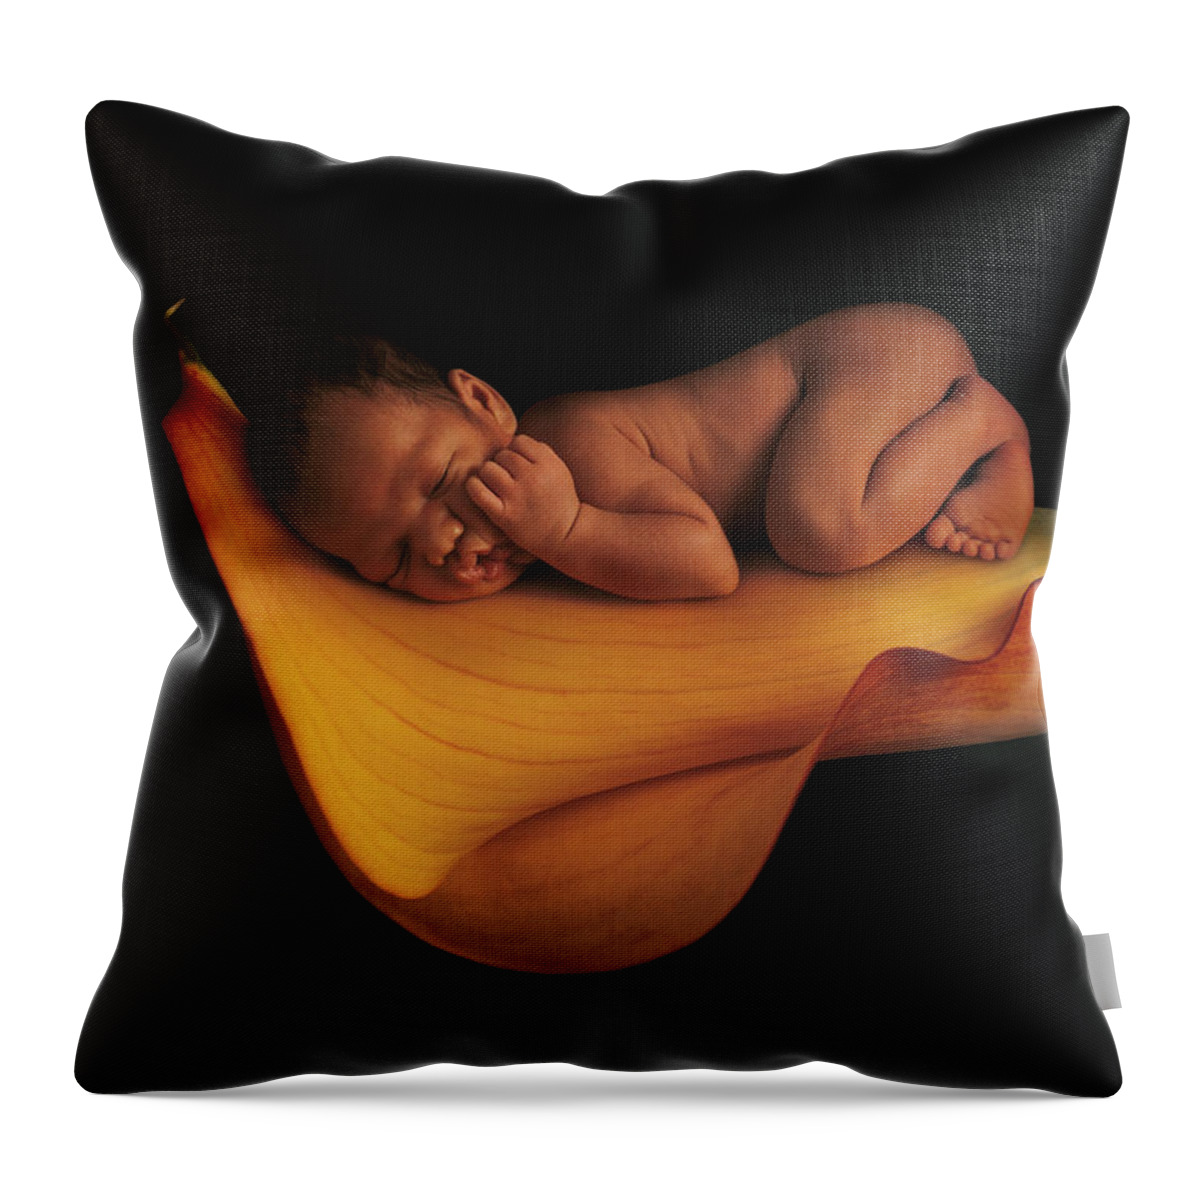 Calla Lily Throw Pillow featuring the photograph Sleeping on a Calla Lily by Anne Geddes